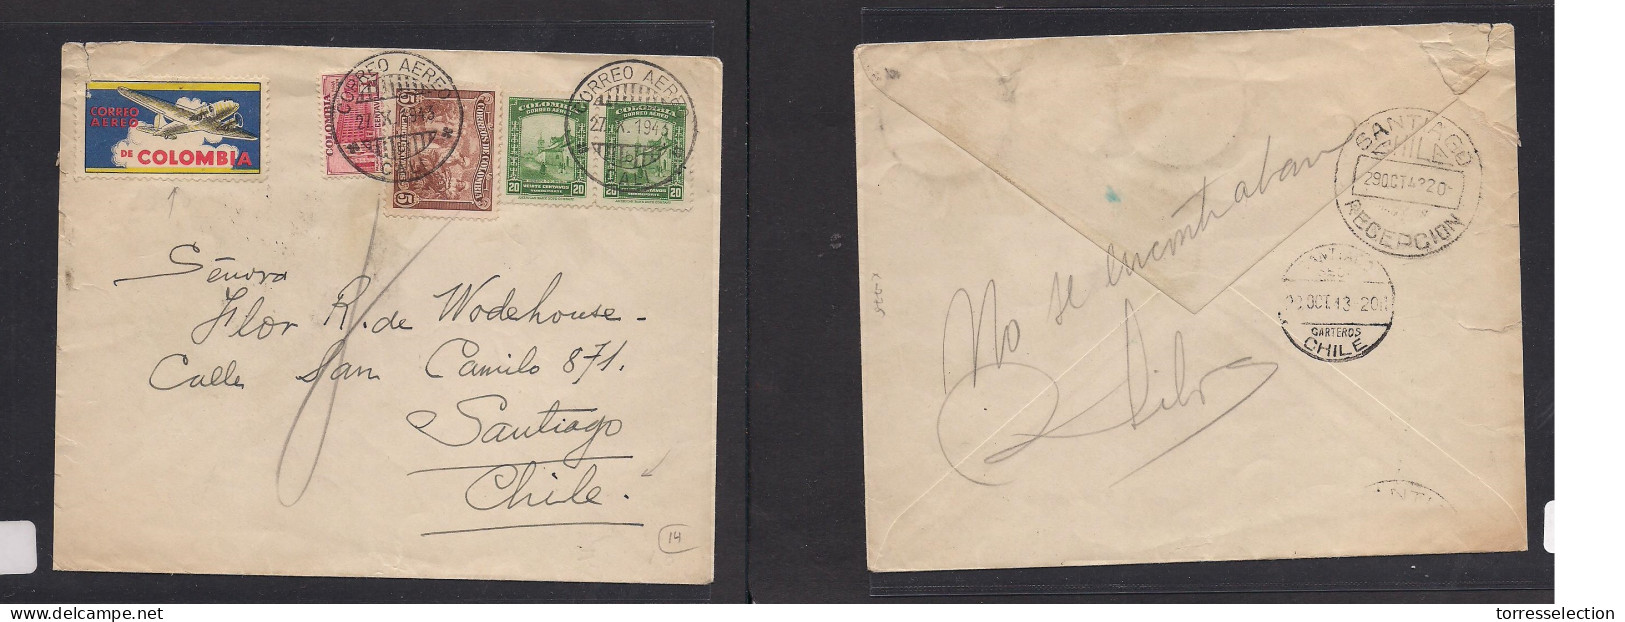 COLOMBIA. Colombia - Cover - 1943 Cali To Chile Air COLOMBIA Mult Fkd Env +color Label, Better Dest Usage. Easy Deal. - Colombia